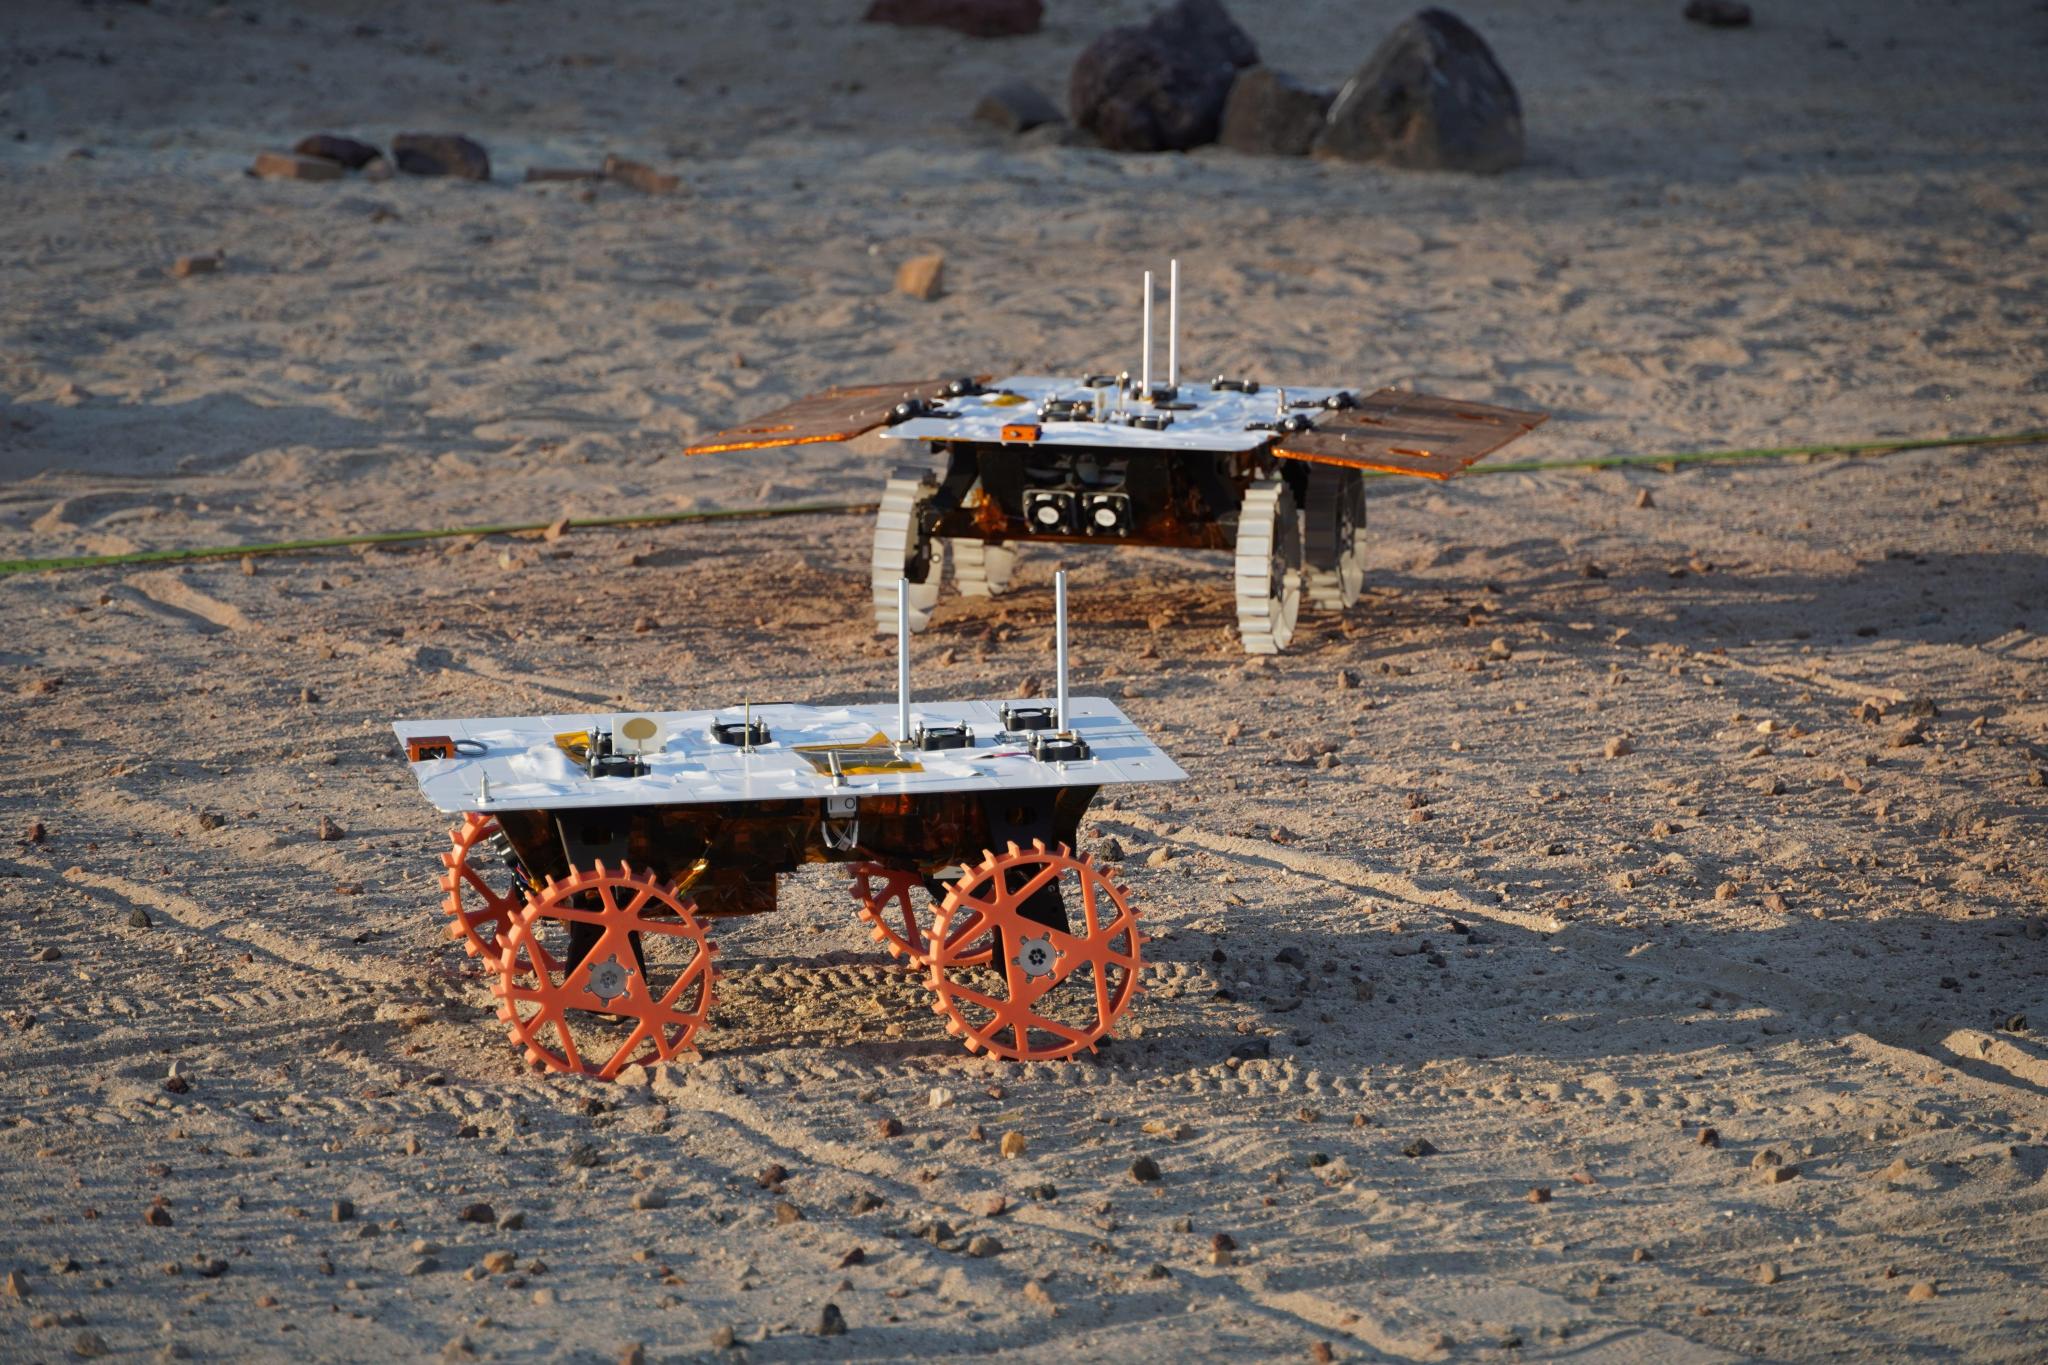 Two small rovers in a sandy yard. The rover in the back has solar panels fitted to it and white wheels. The one in the front has orange wheels and no solar panels.